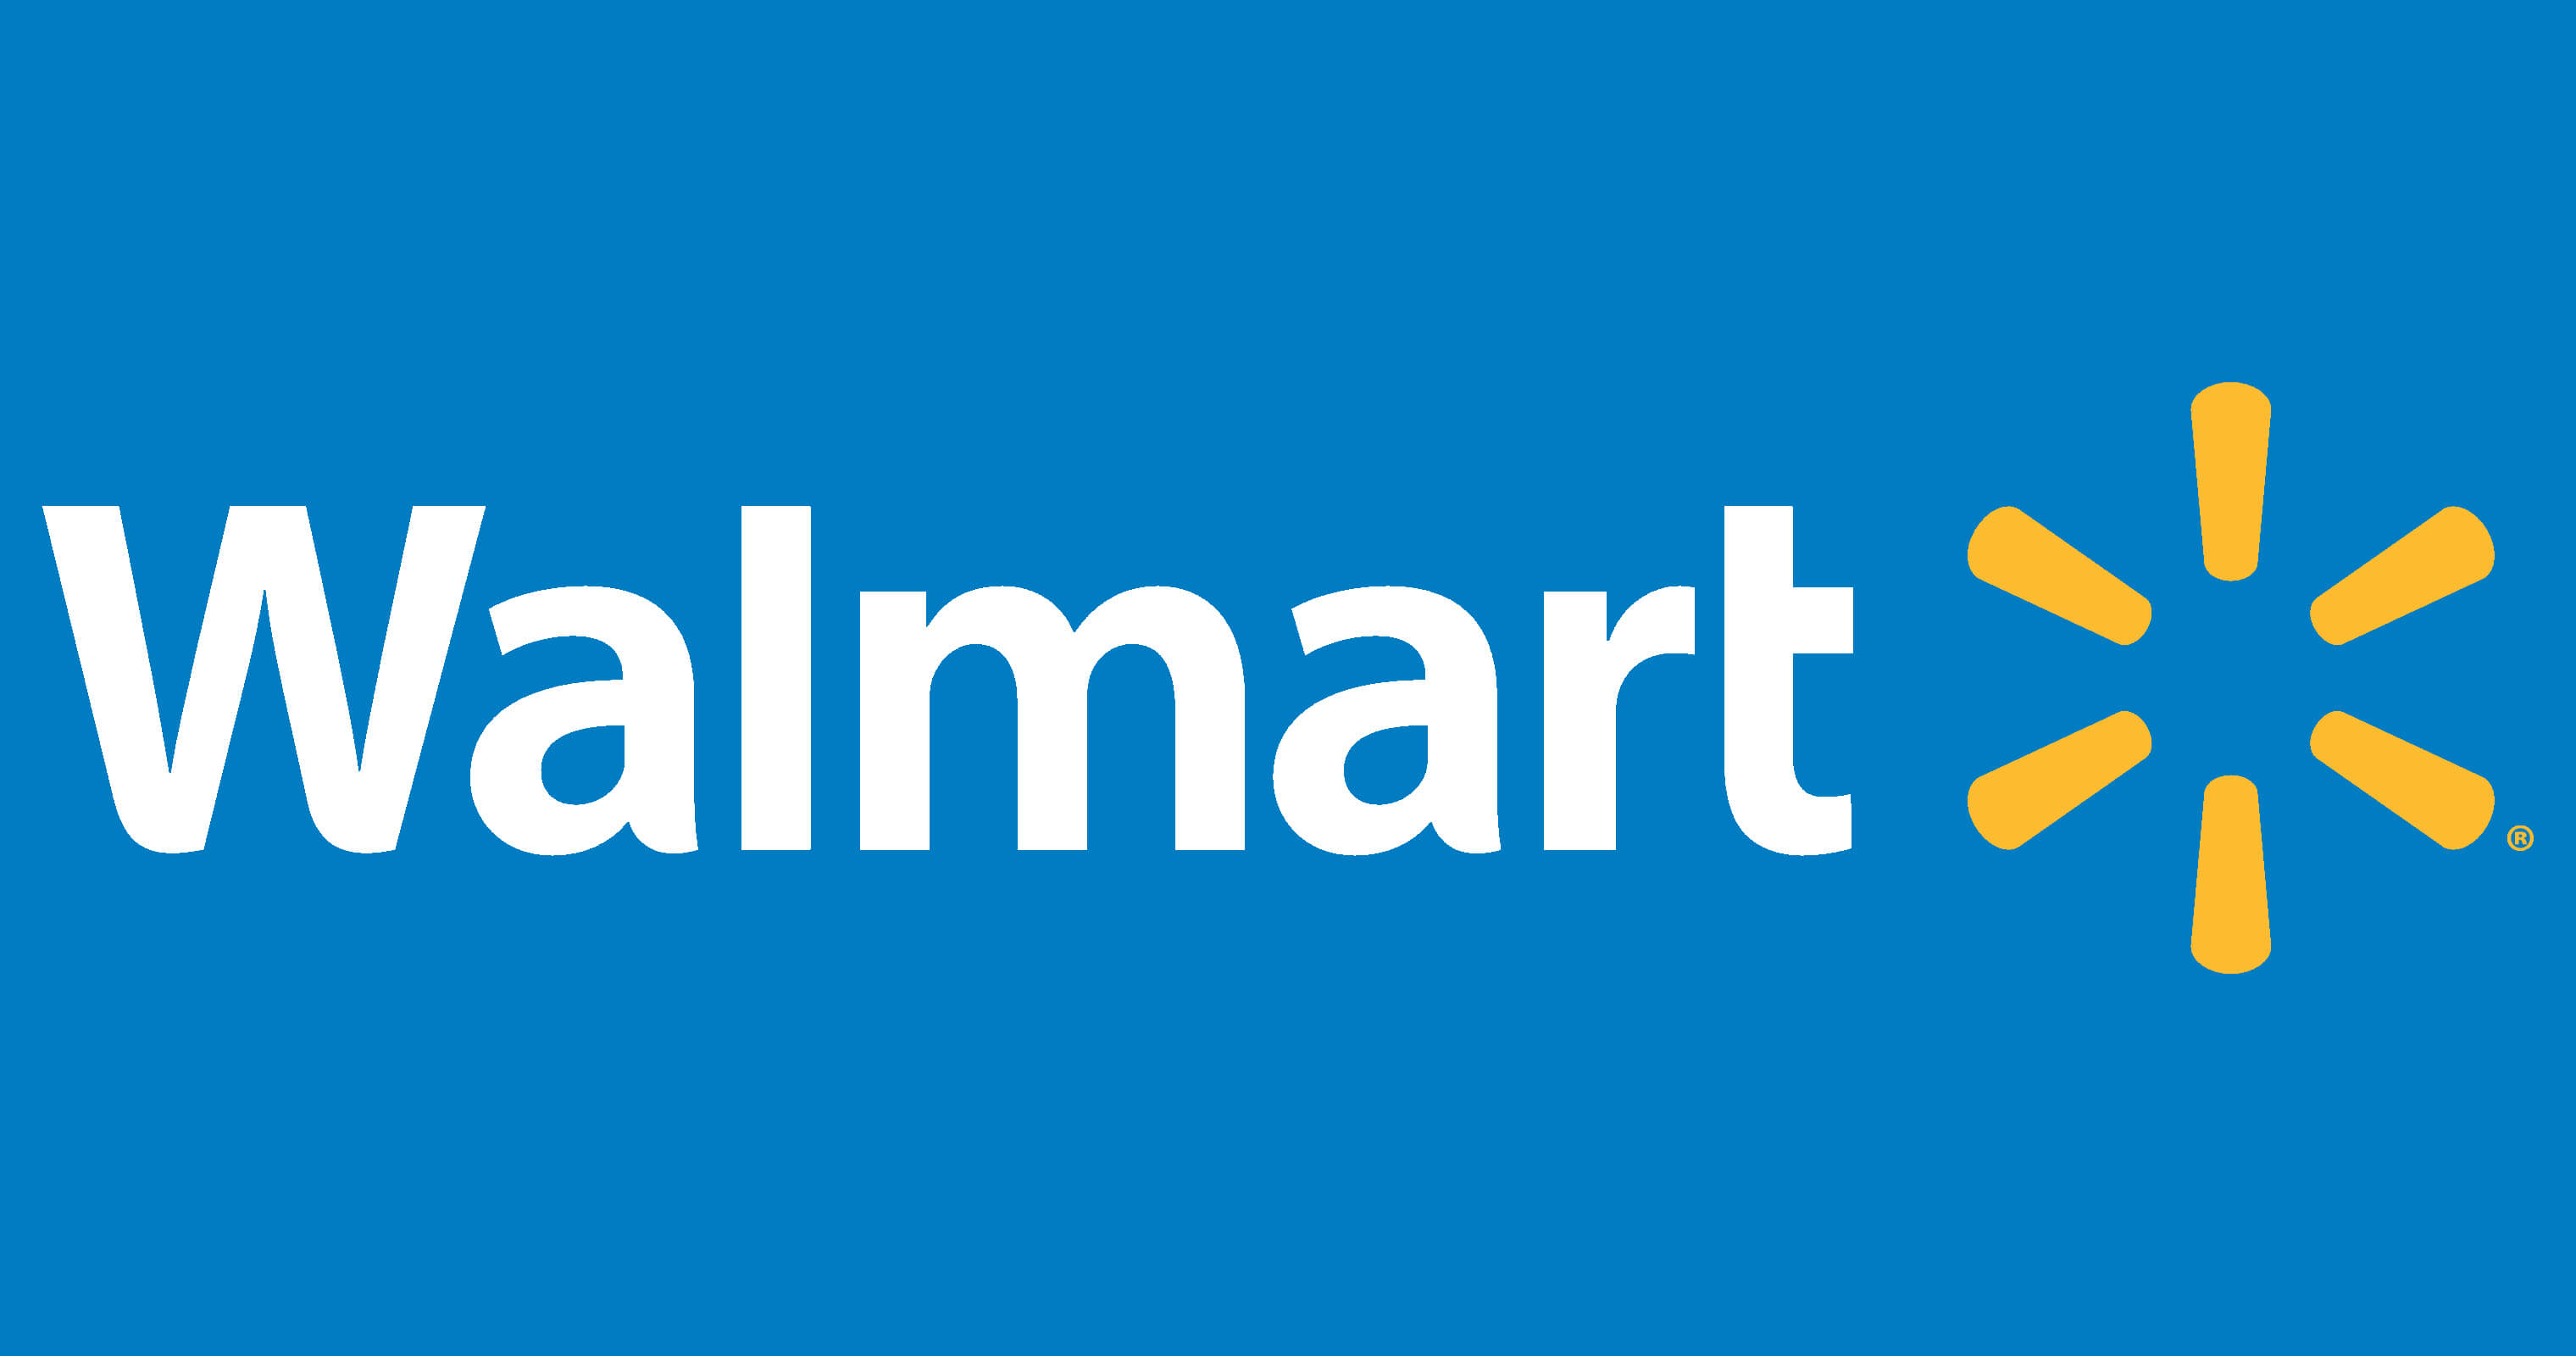 Walmart logo for their truck advertising campaign